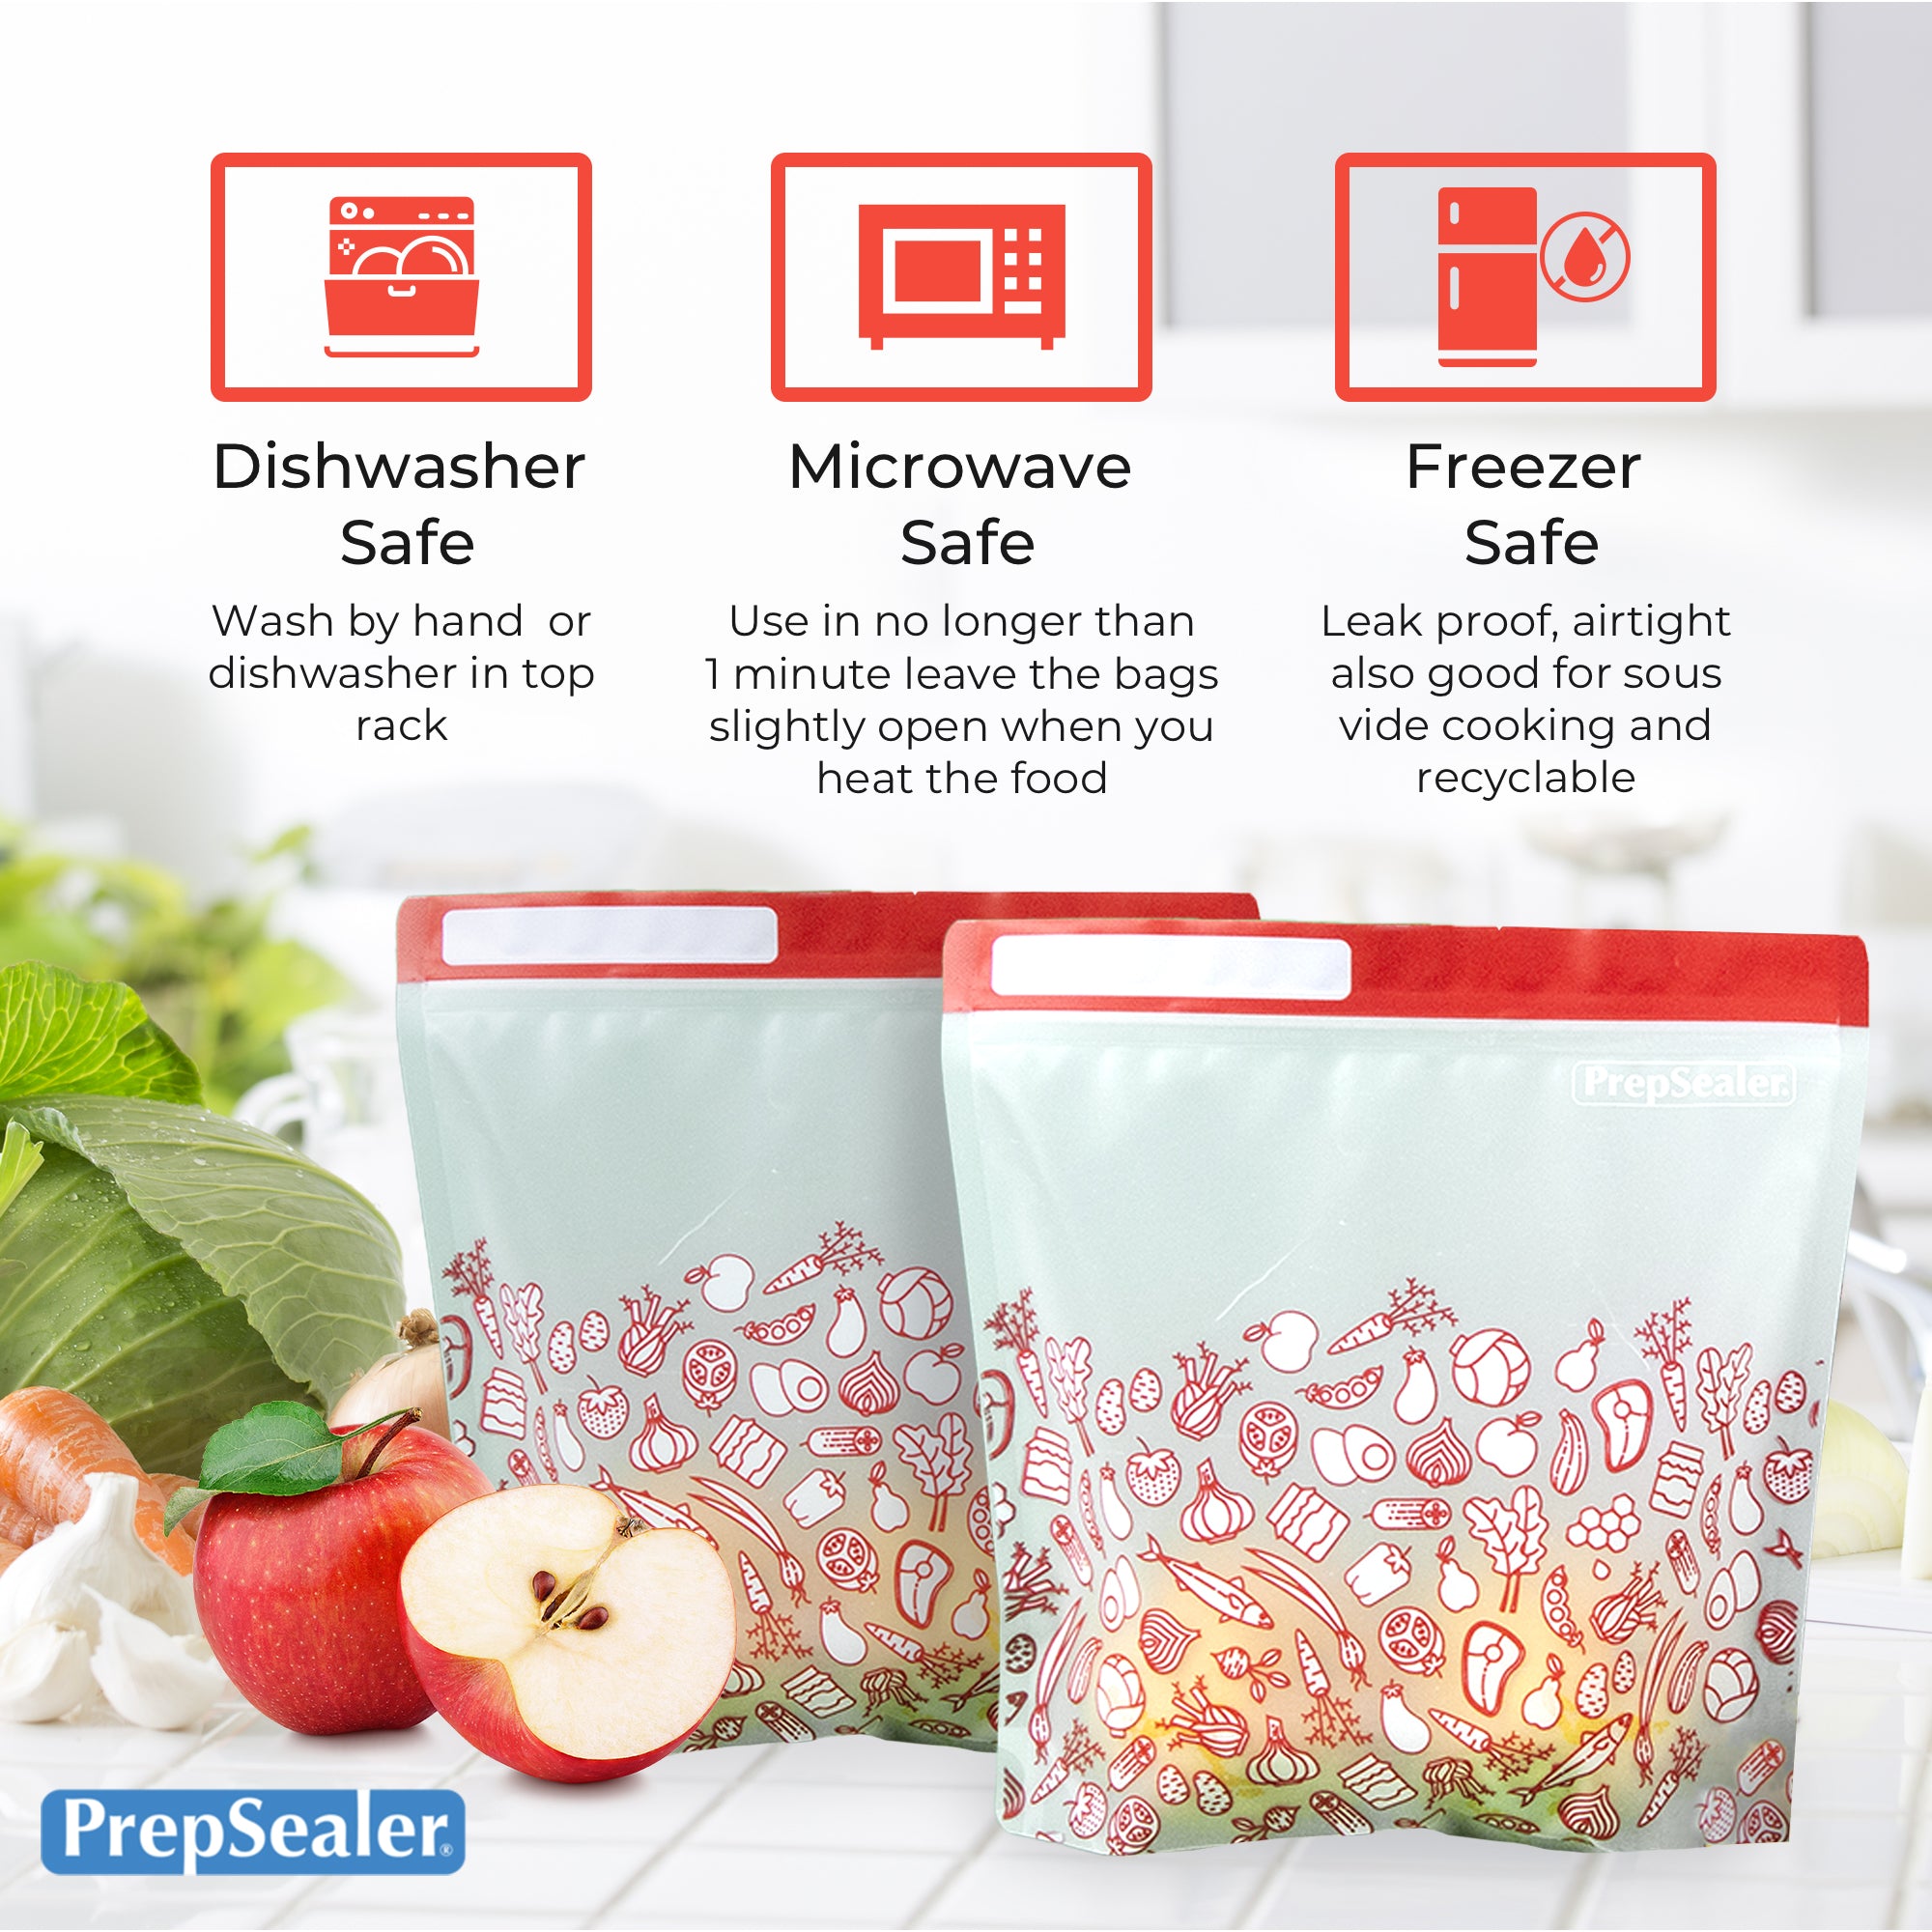 How to clean reusable food-storage bags - The Washington Post